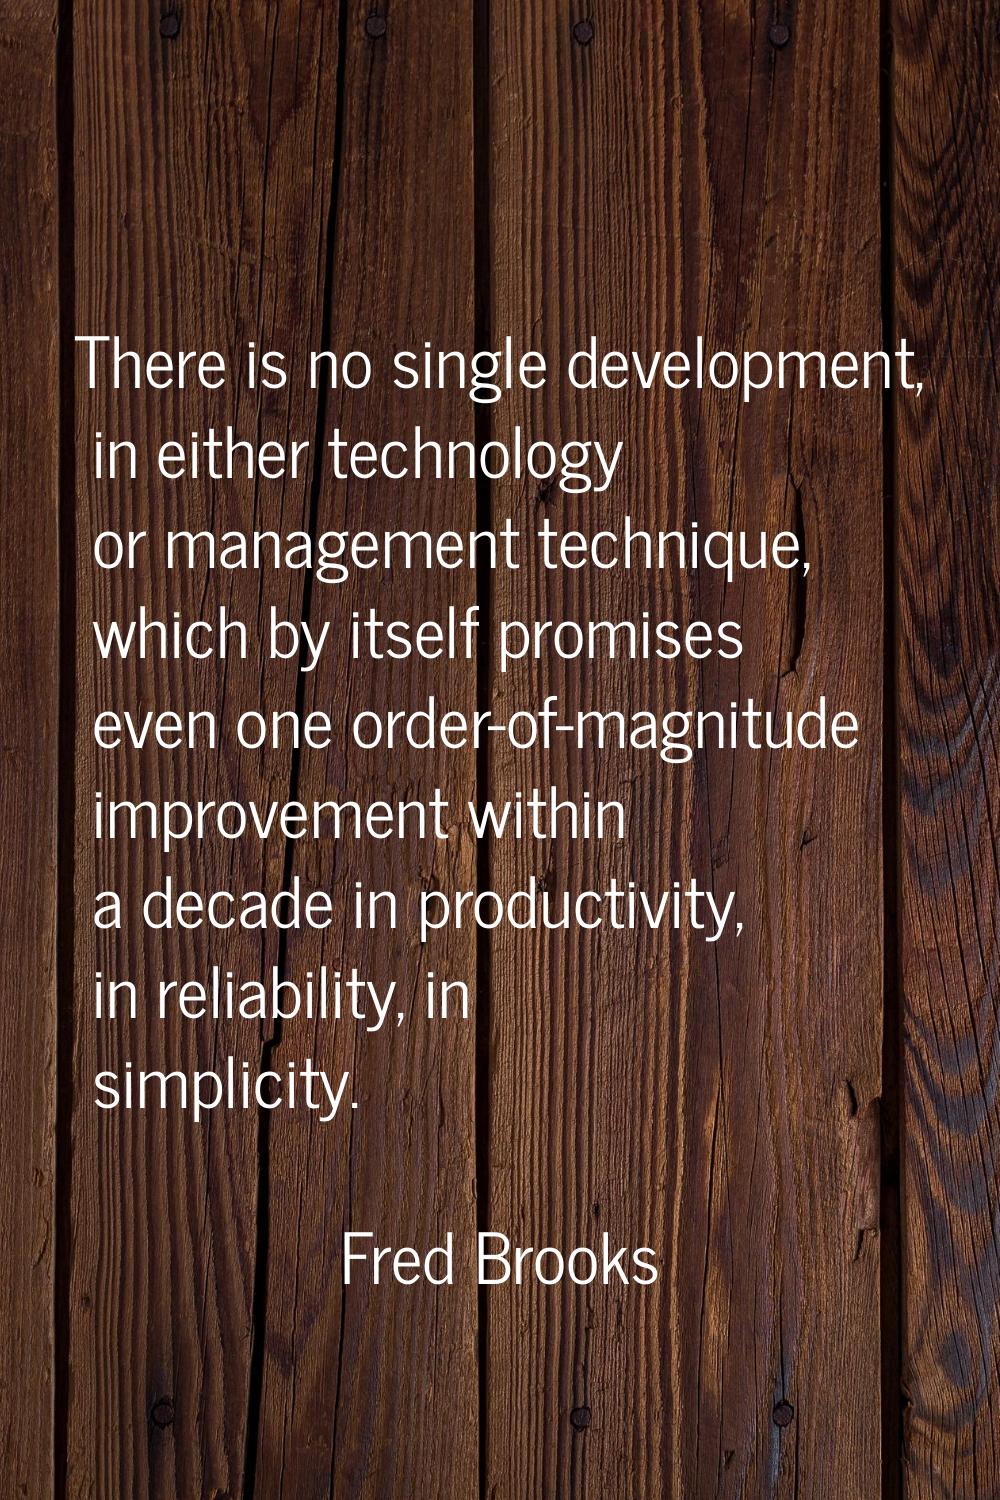 There is no single development, in either technology or management technique, which by itself promi